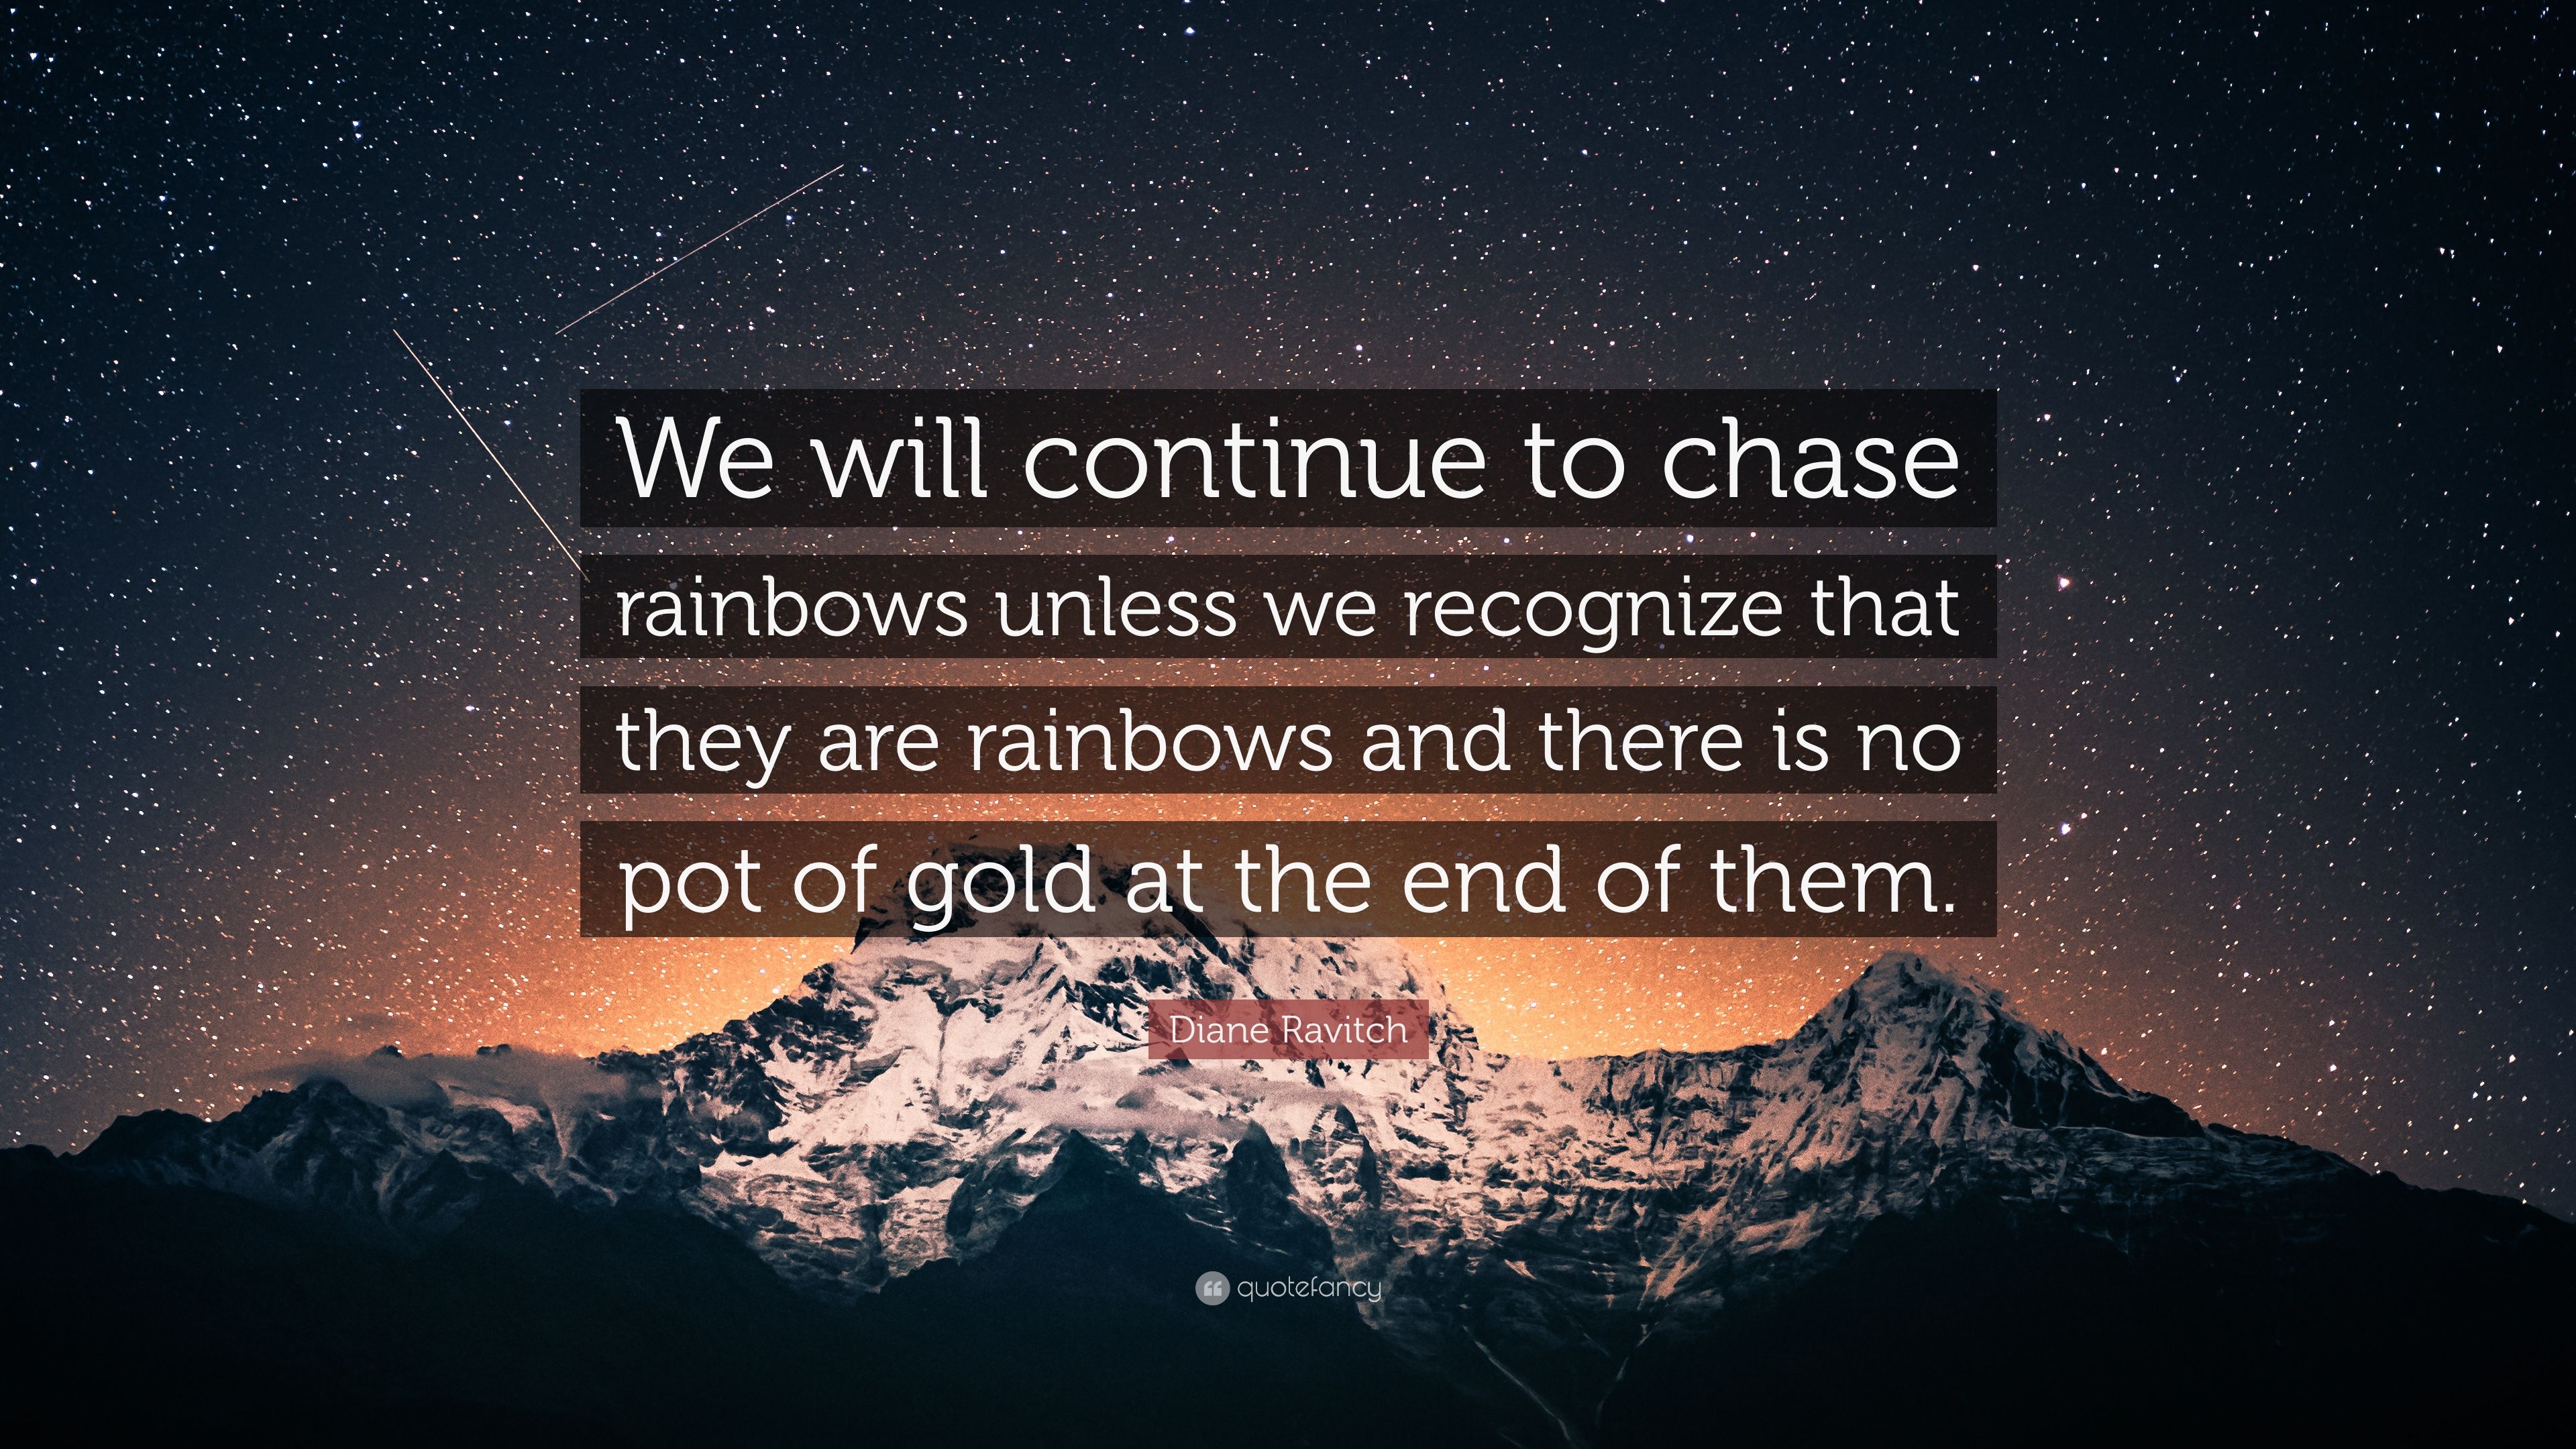 Diane Ravitch Quote: “We will continue to chase rainbows unless we